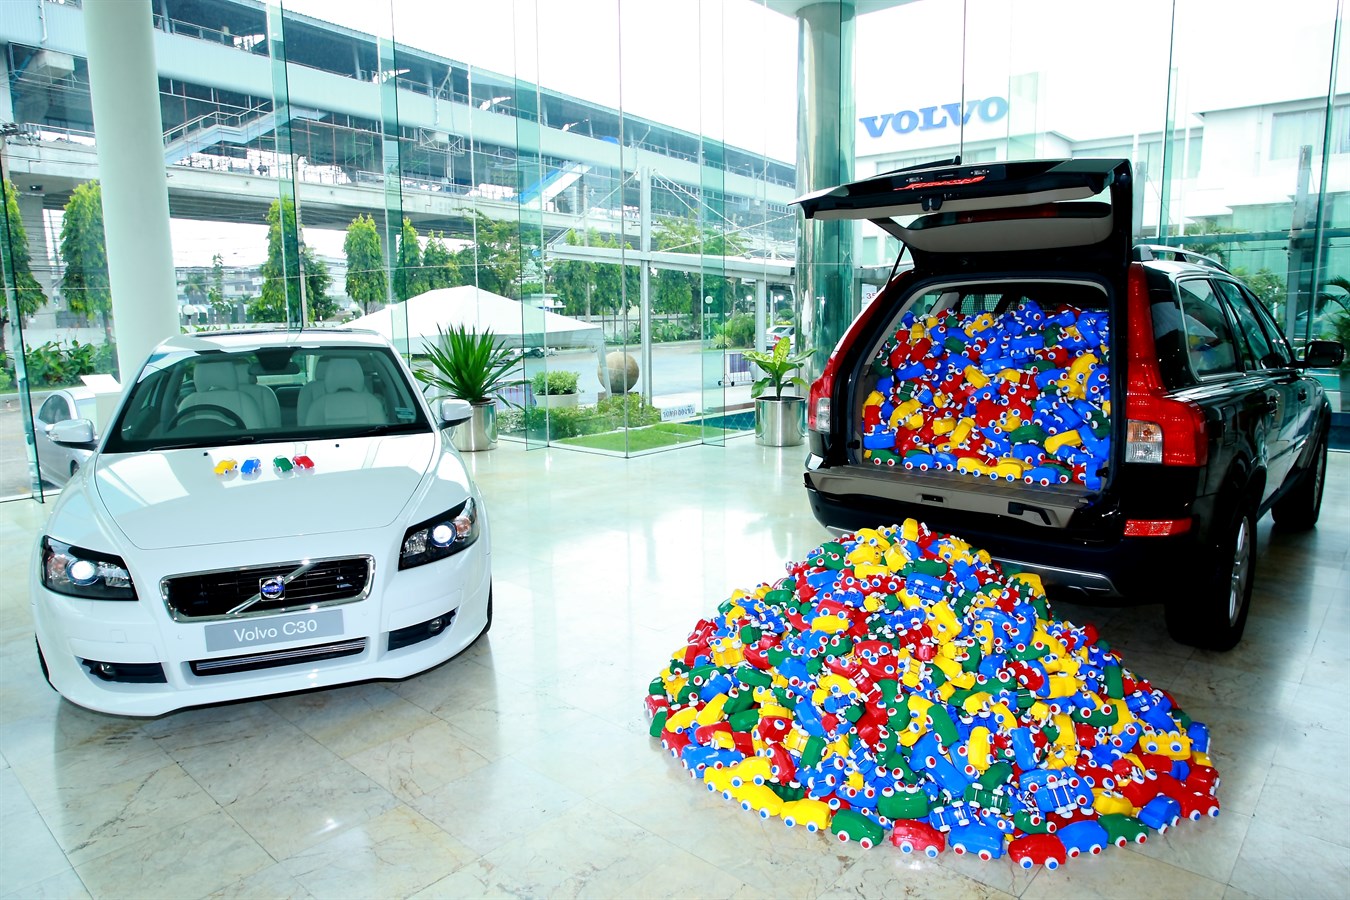 Volvo Car Thailand gives away 10,000 Volvo toy cars